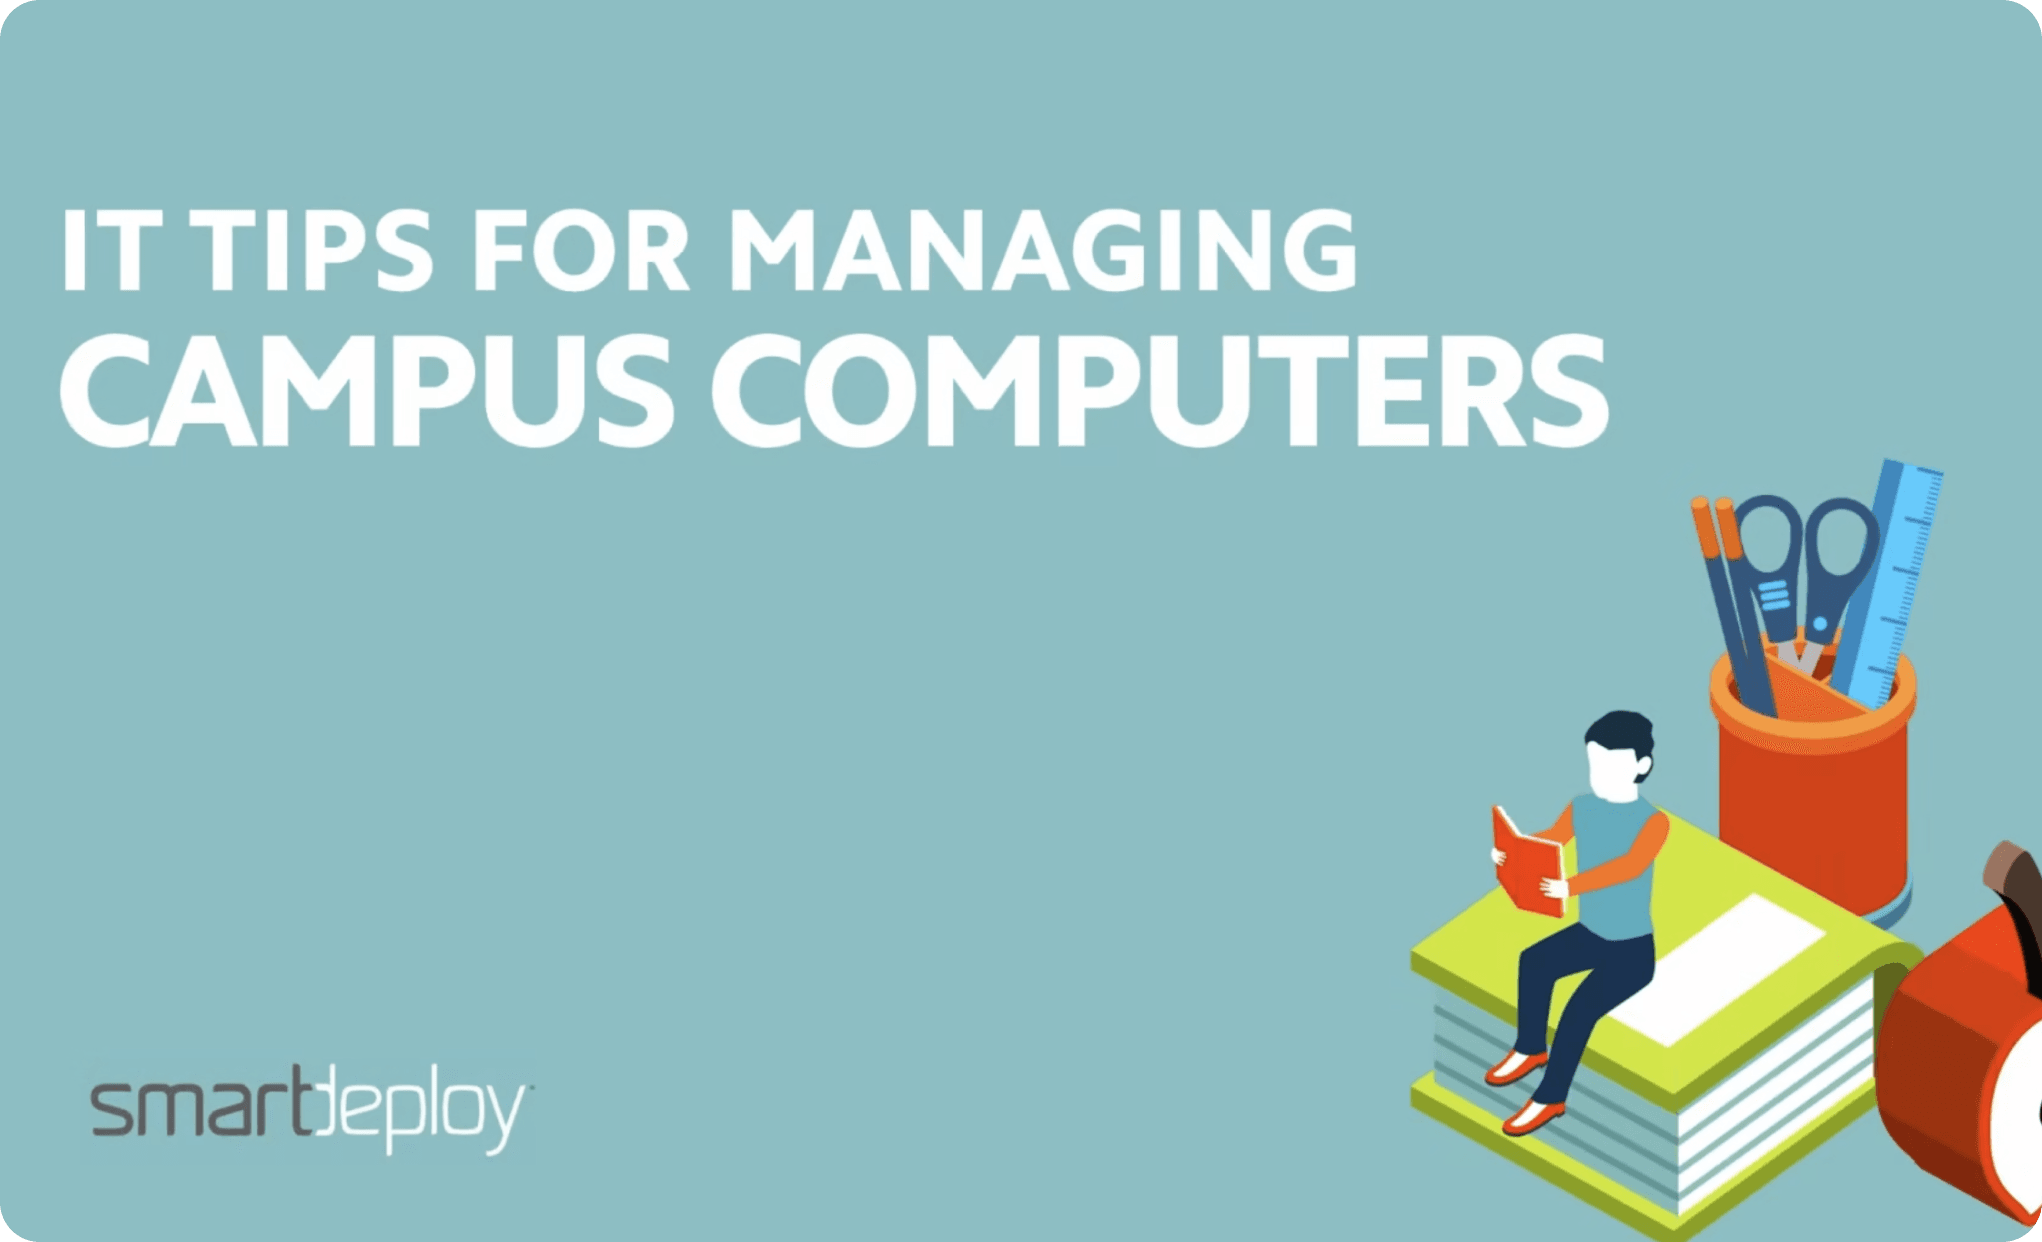  IT tips for managing campus computers